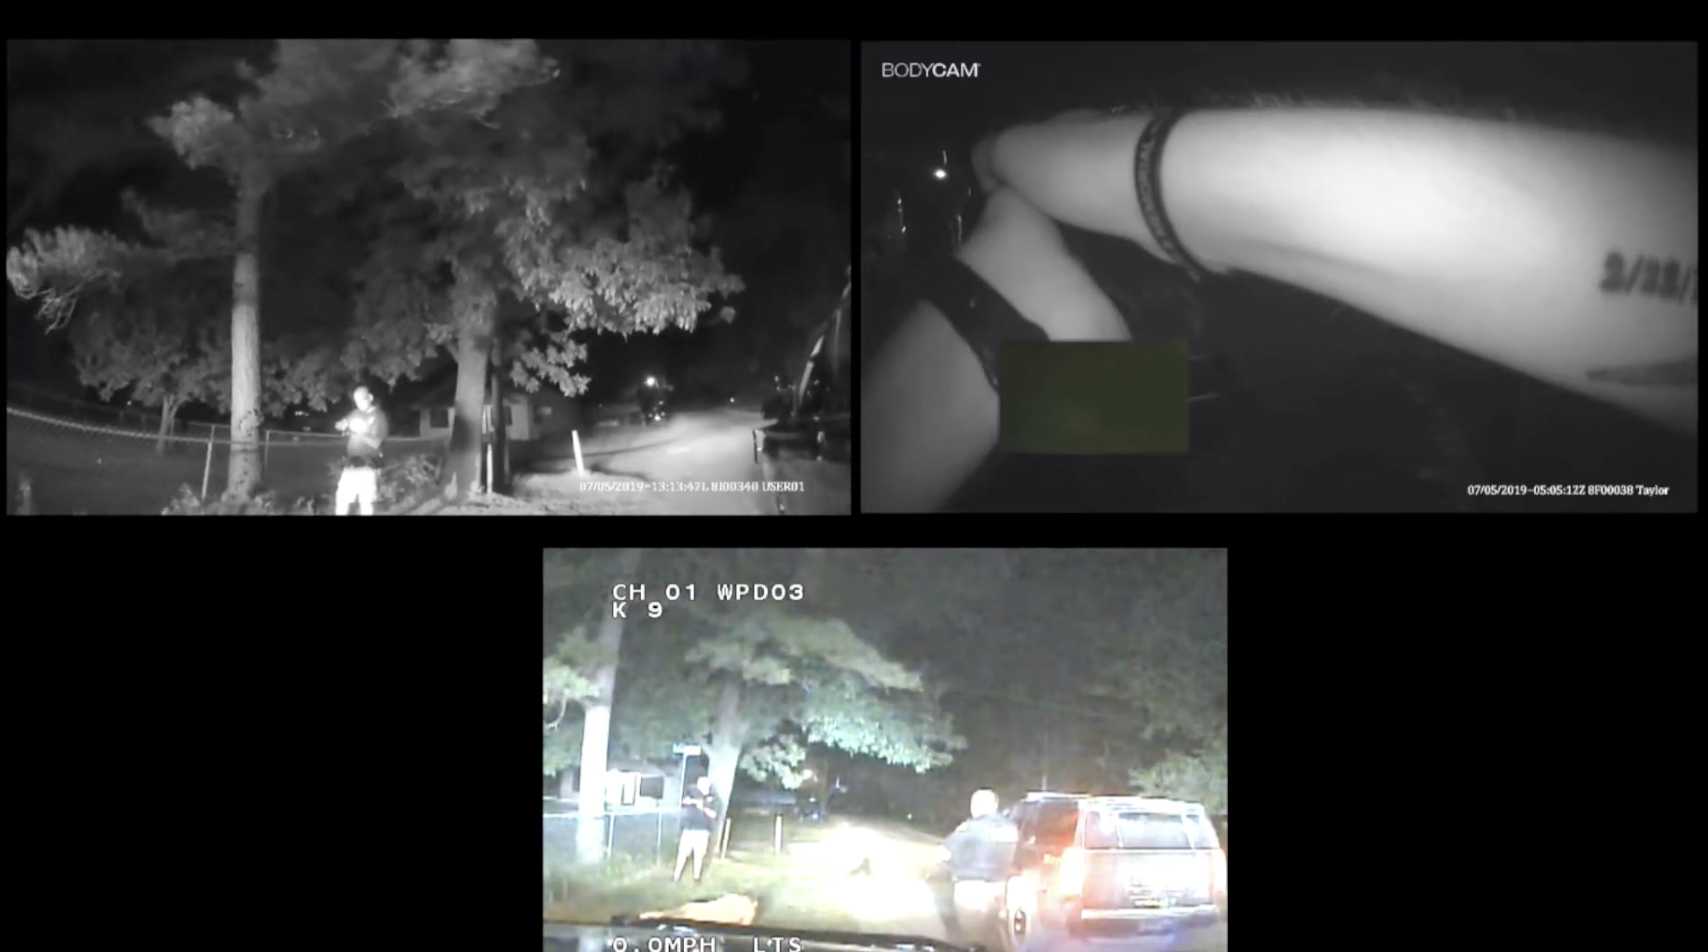 Watch video released of oklahoma cops repeatedly tasering